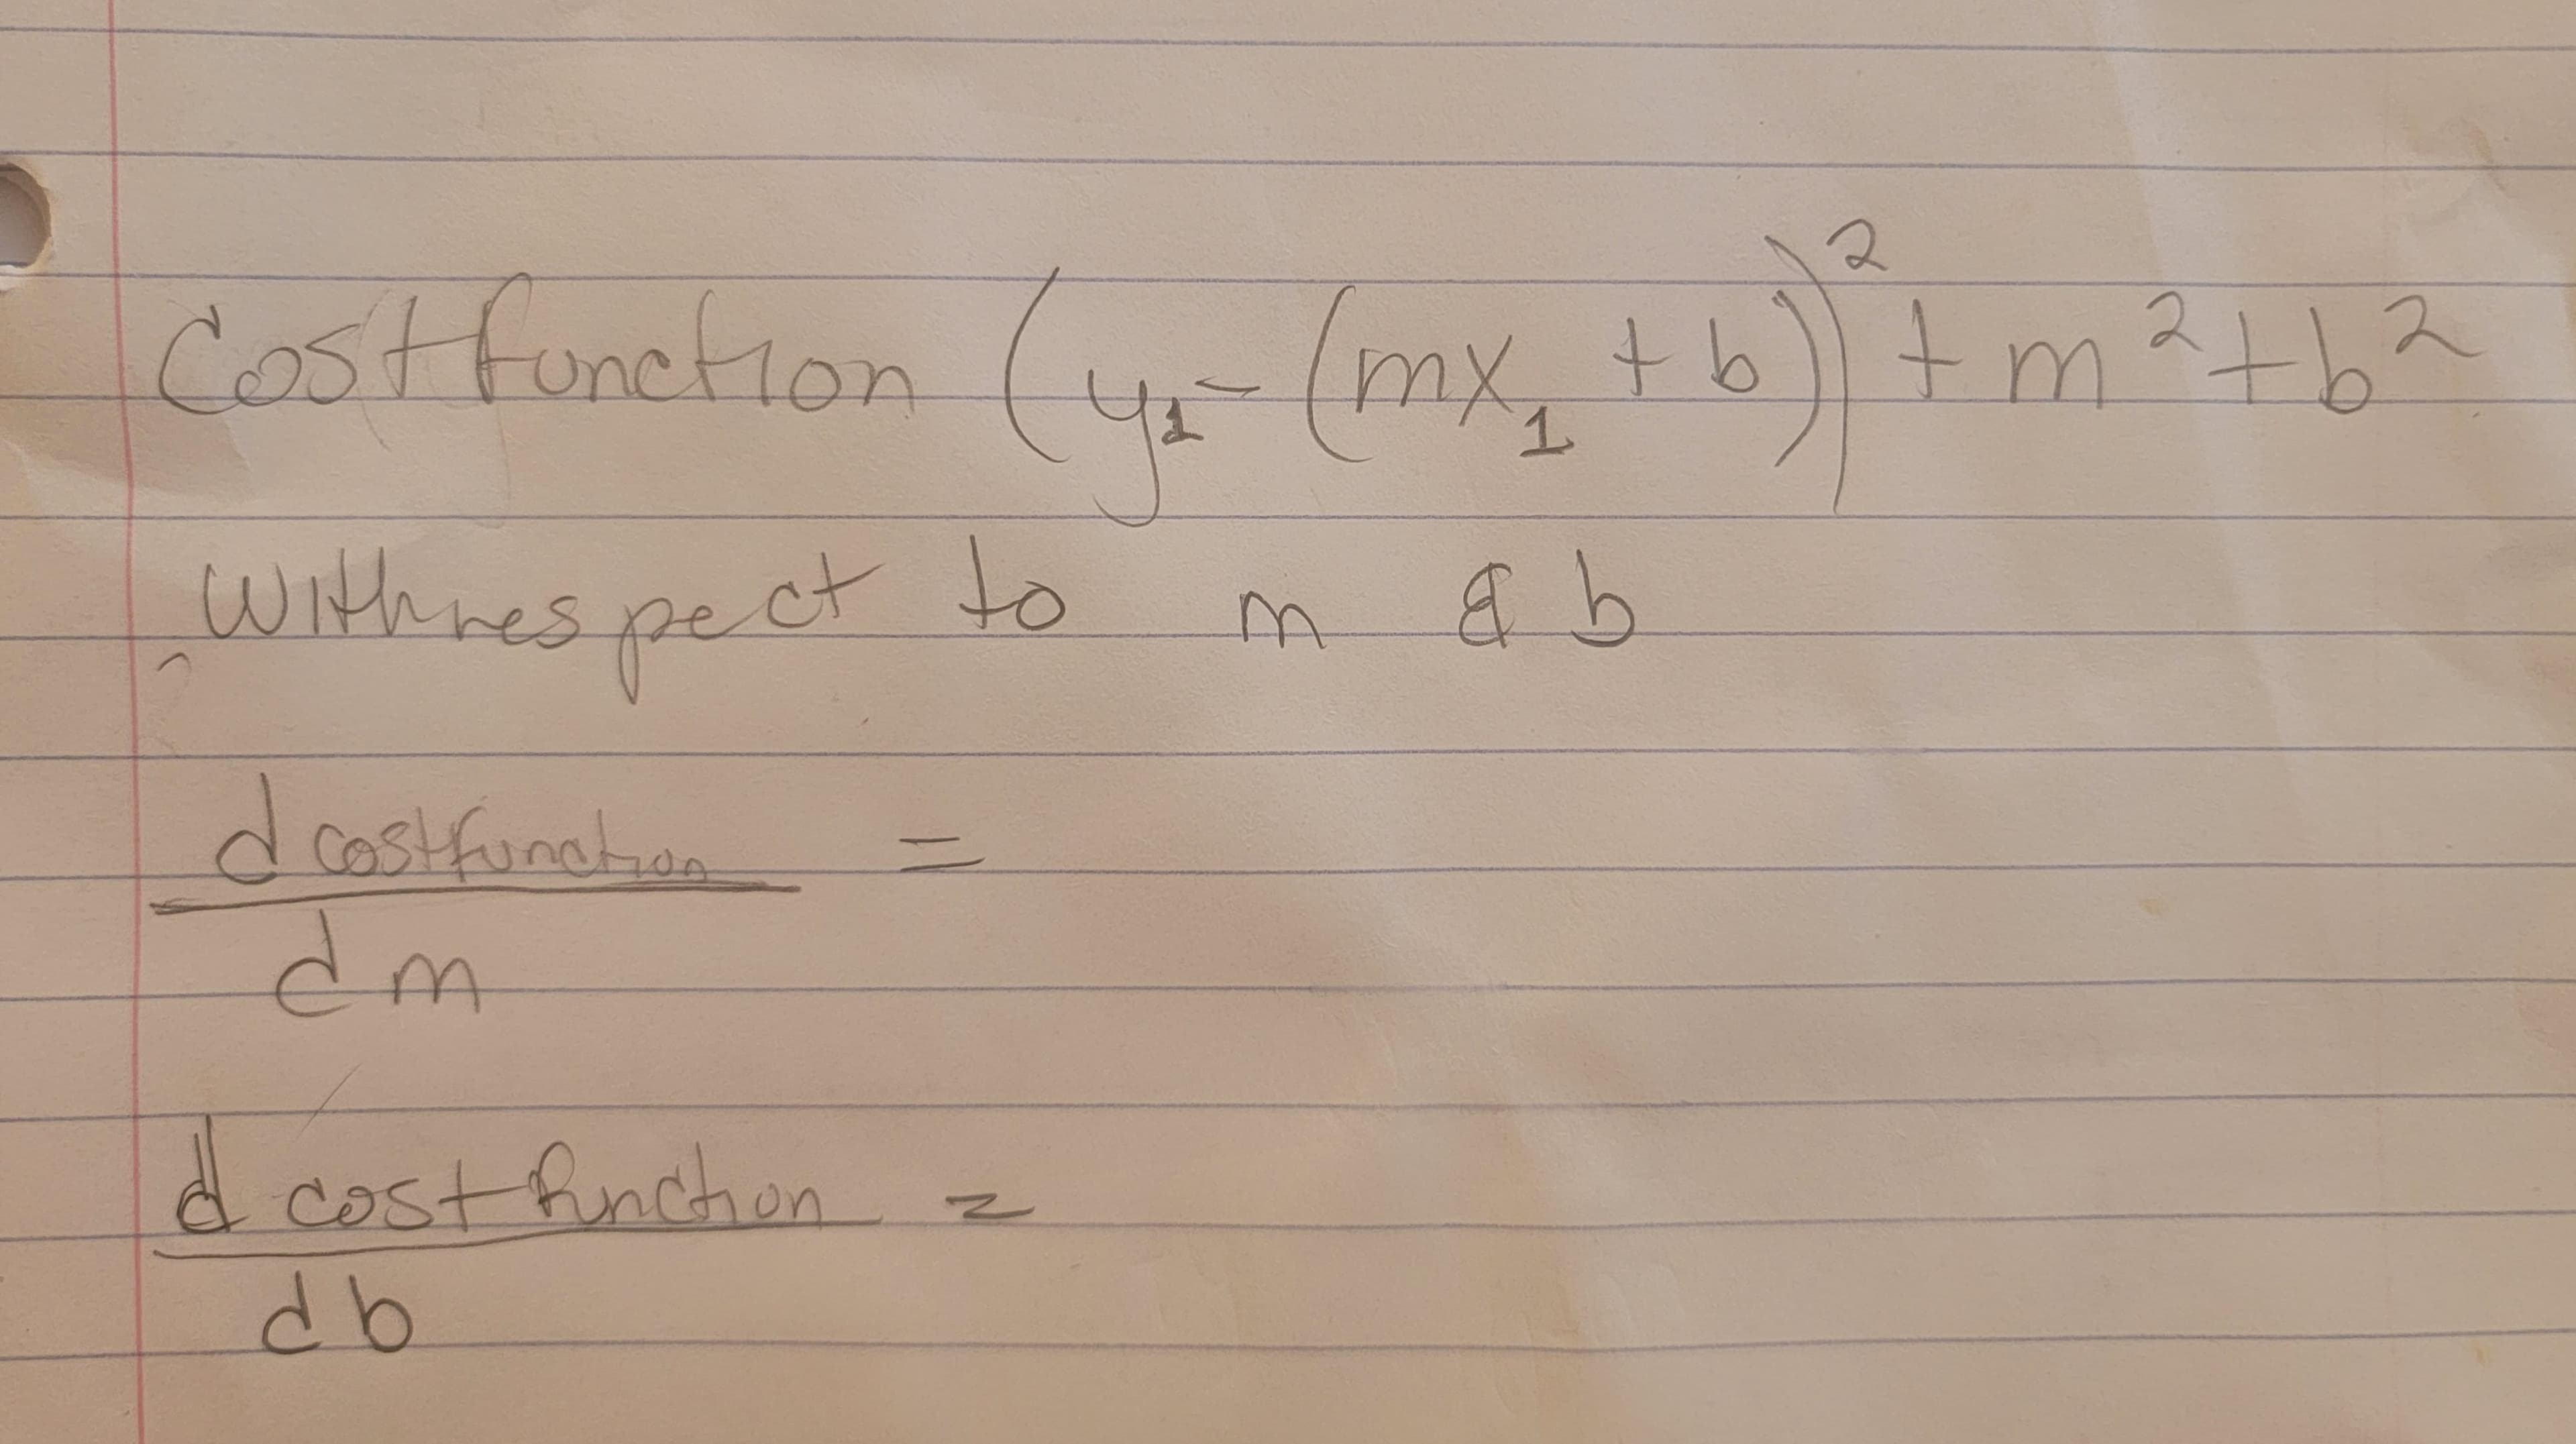 2
Cost function (y₁ - (mx₂ + b)² + m² + b²
2
1
& b
with respect
pect to
d cost function
dm
d cost function
db
=